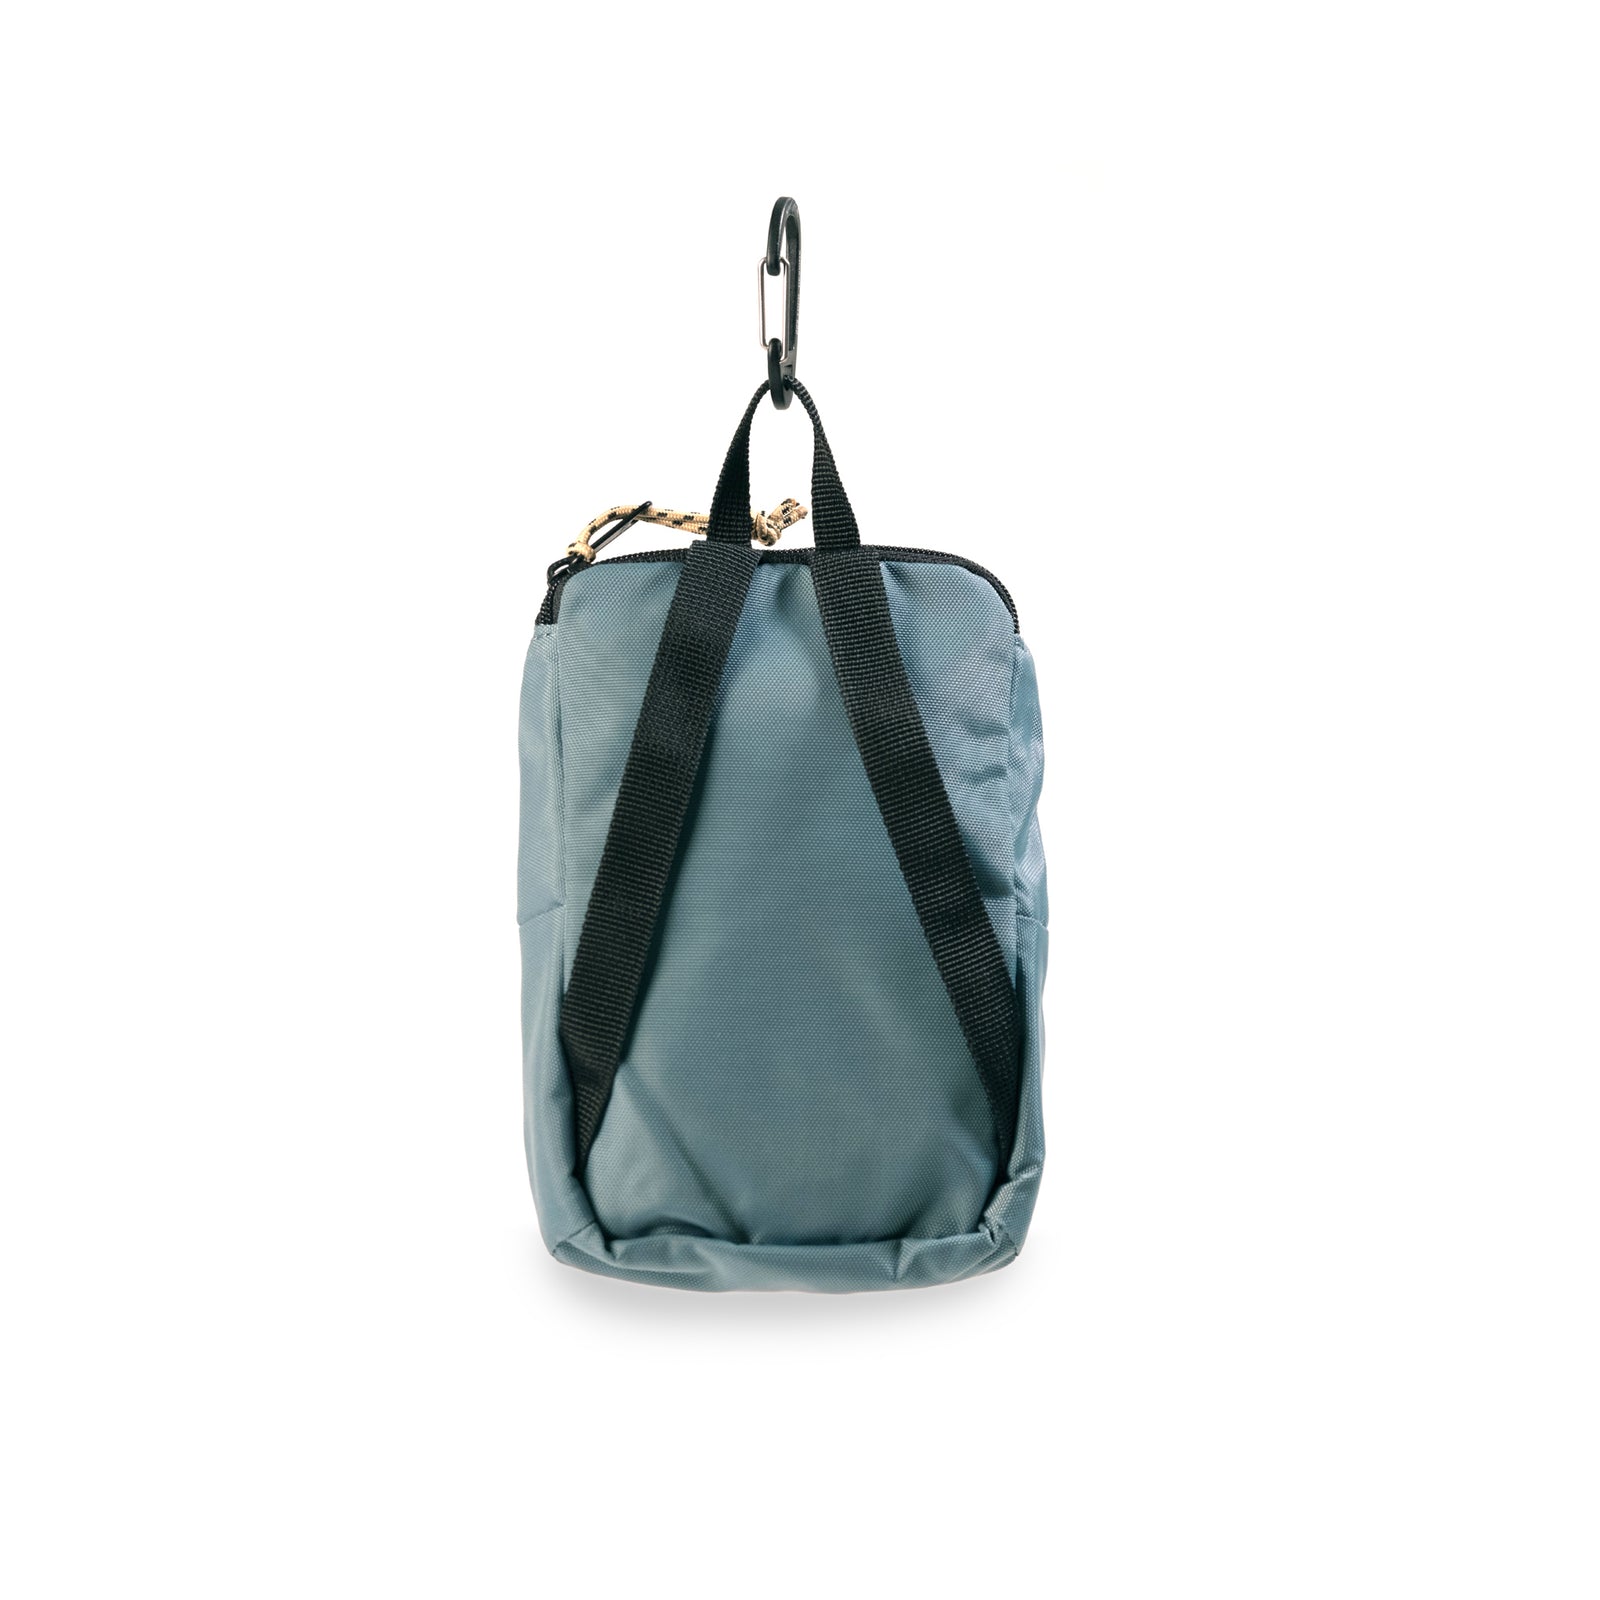 Back View of Topo Designs Rover Pack Micro in "Sea Pine"